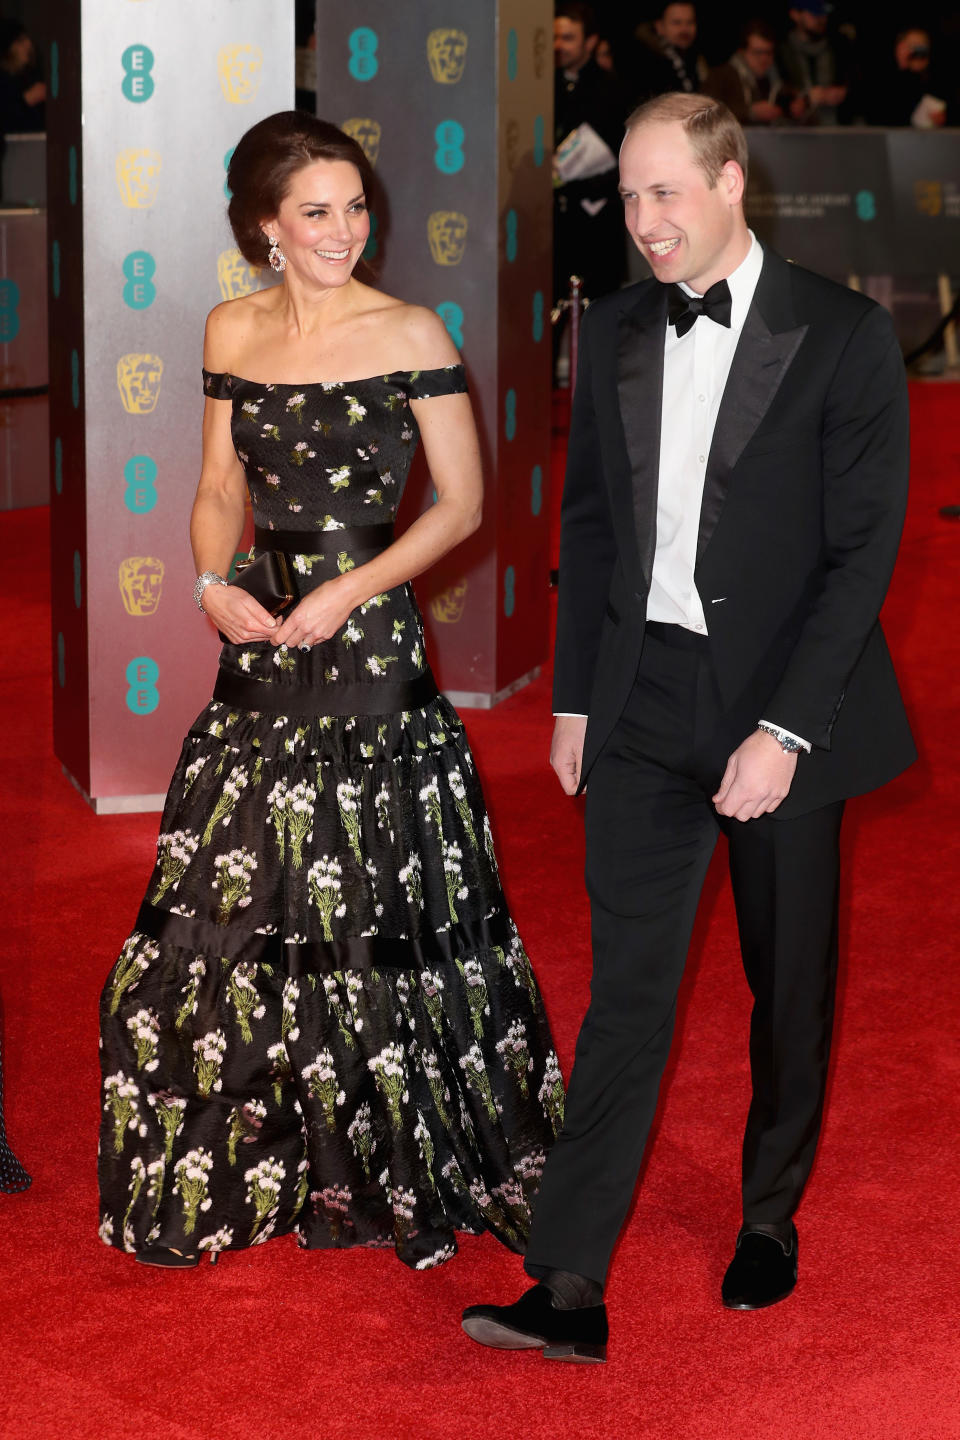 <p>For her debut BAFTA appearance alongside Prince William, the Duchess of Cambridge opted for a cold-shoulder dress by Alexander McQueen. <em>[Photo: Getty] </em> </p>